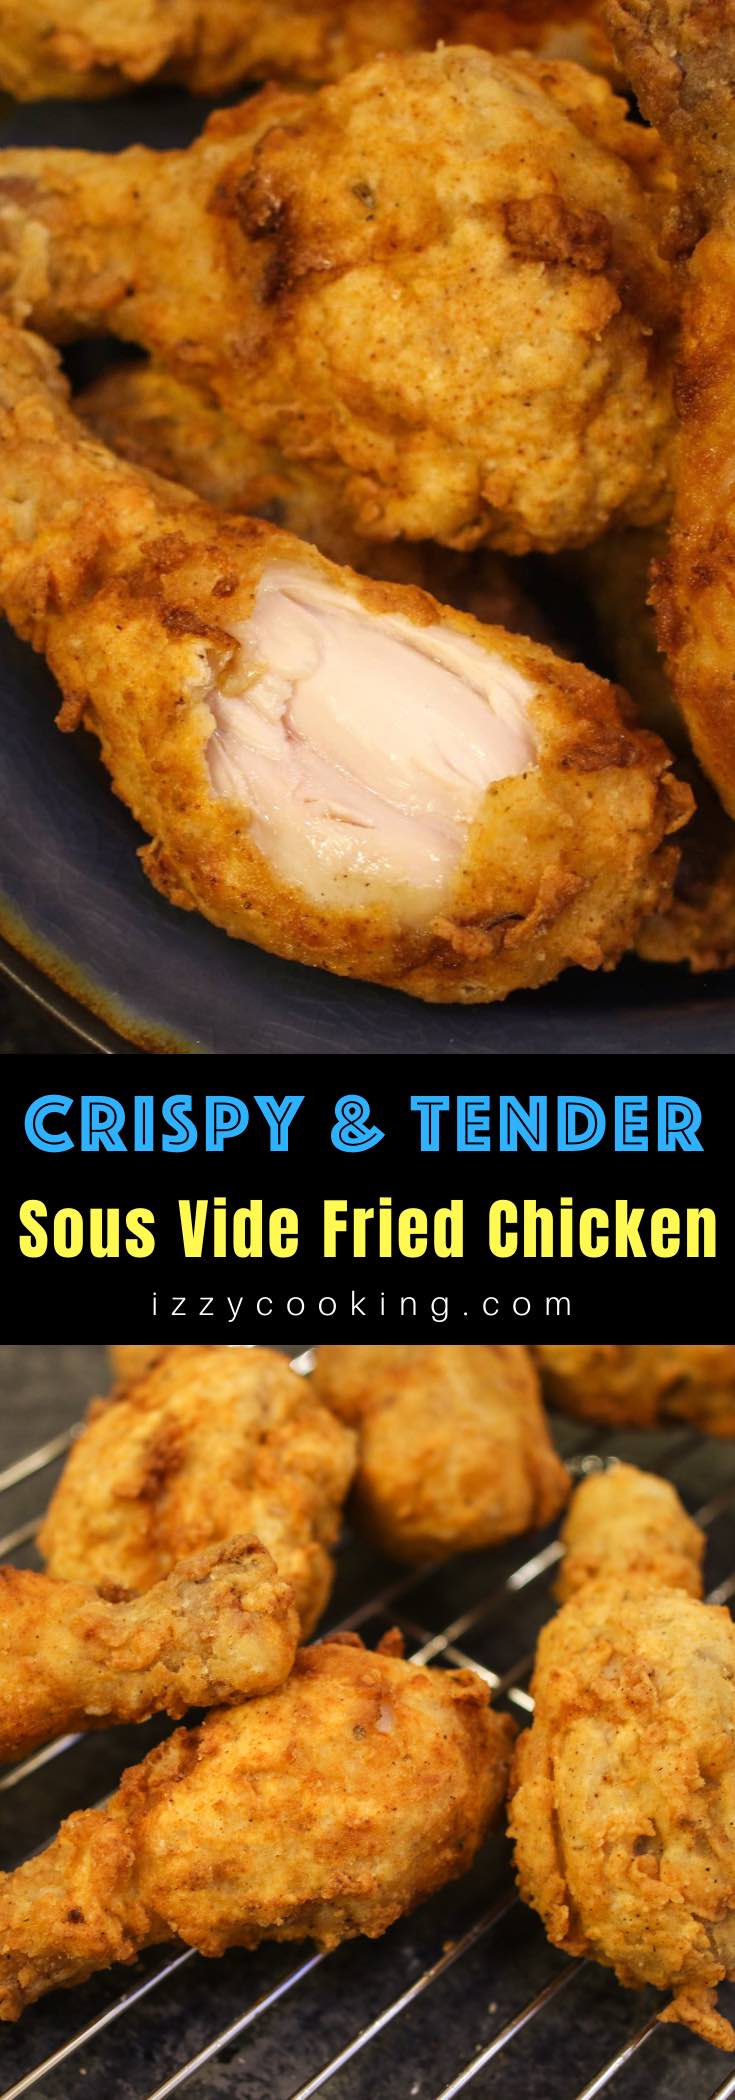 Sous Vide Fried Chicken is crispy and crunchy on the outside with the most tender and juicy meat on the inside. It’s the easiest way to fry chicken as sous vide produces evenly cooked meat, which is then coated with flour and buttermilk and deep fried quickly to golden perfection. Great for a potluck or picnic! #FriedChicken #SousVideChicken